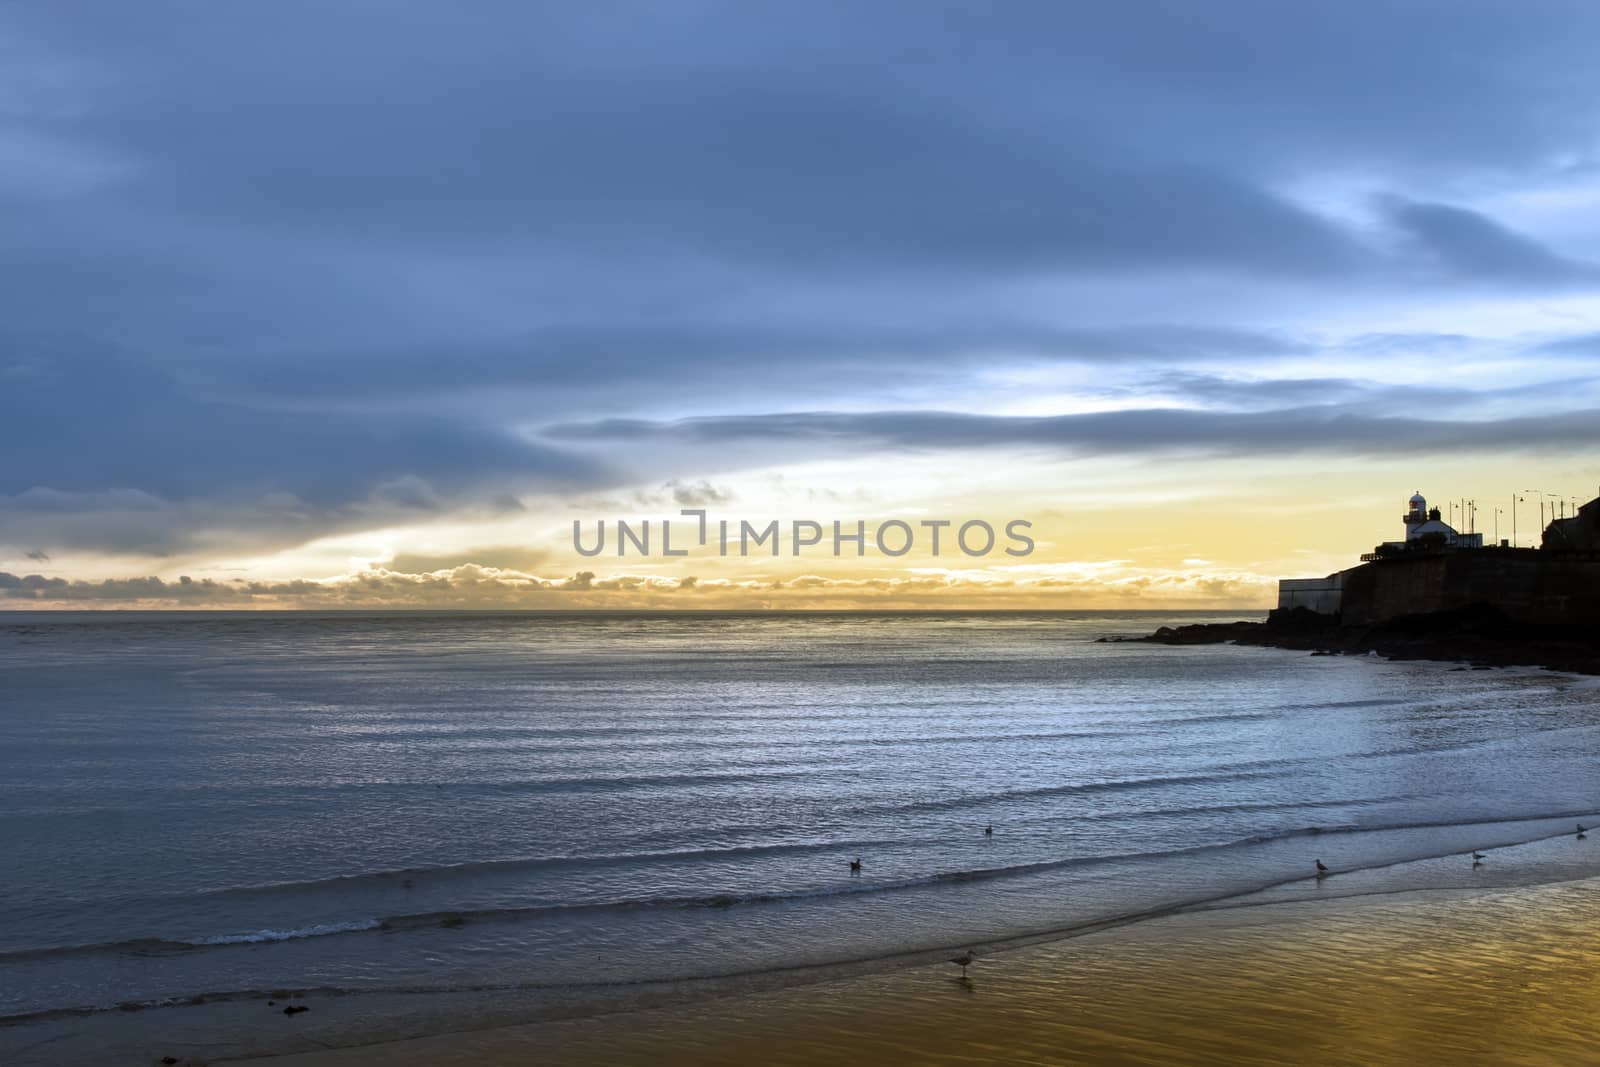 birds on the beach in Youghal county Cork Ireland with lighthouse in the background